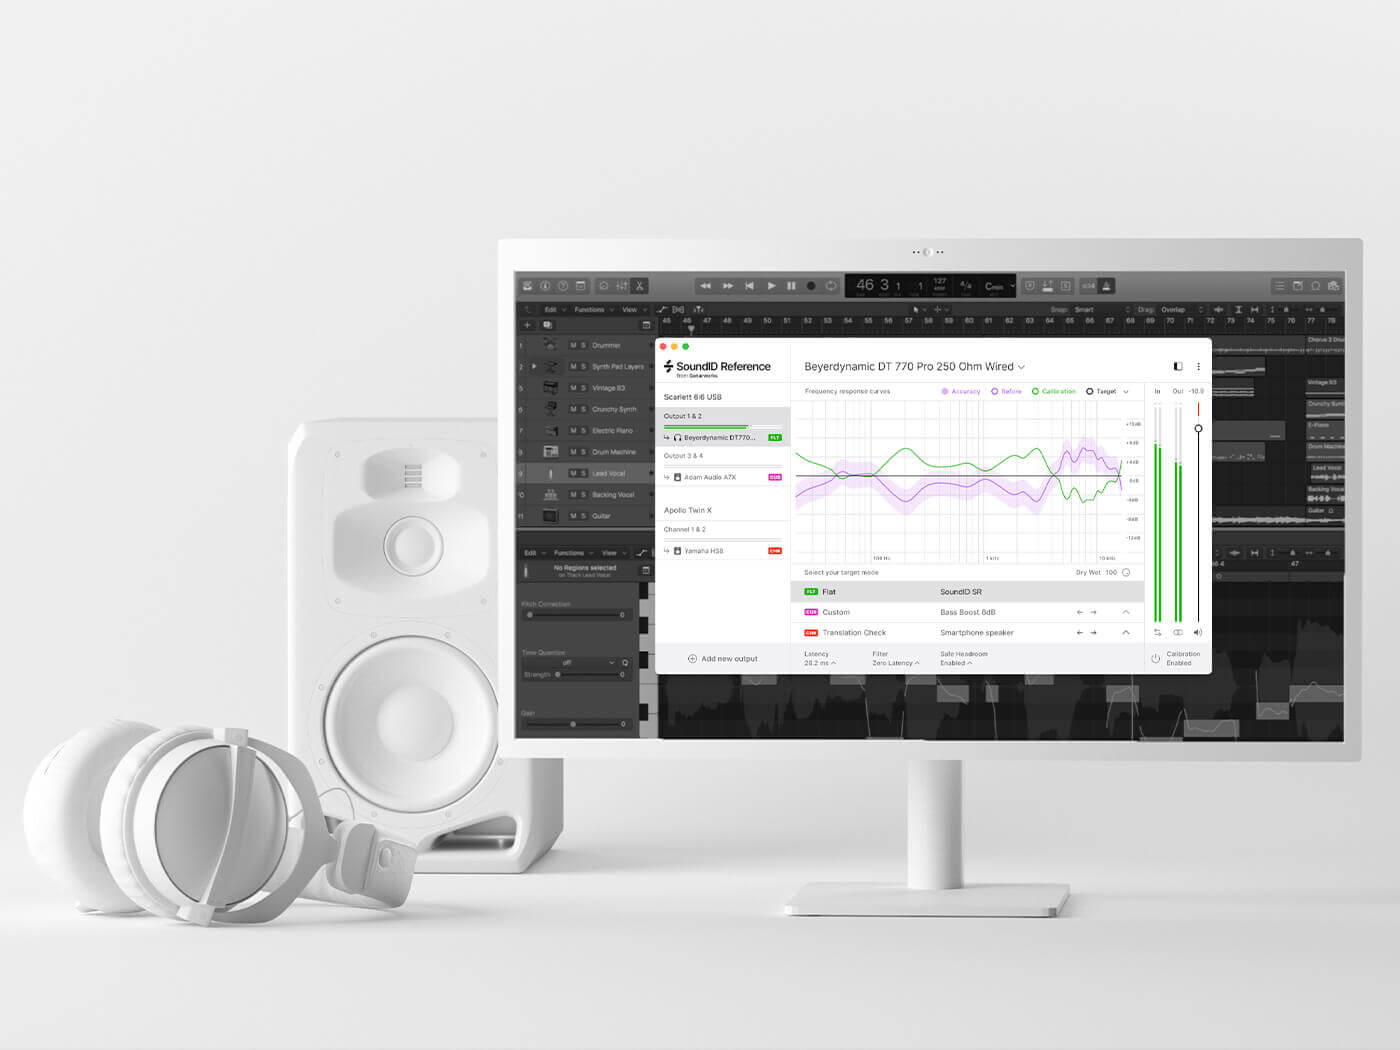 Review: Sonarworks SoundID Reference